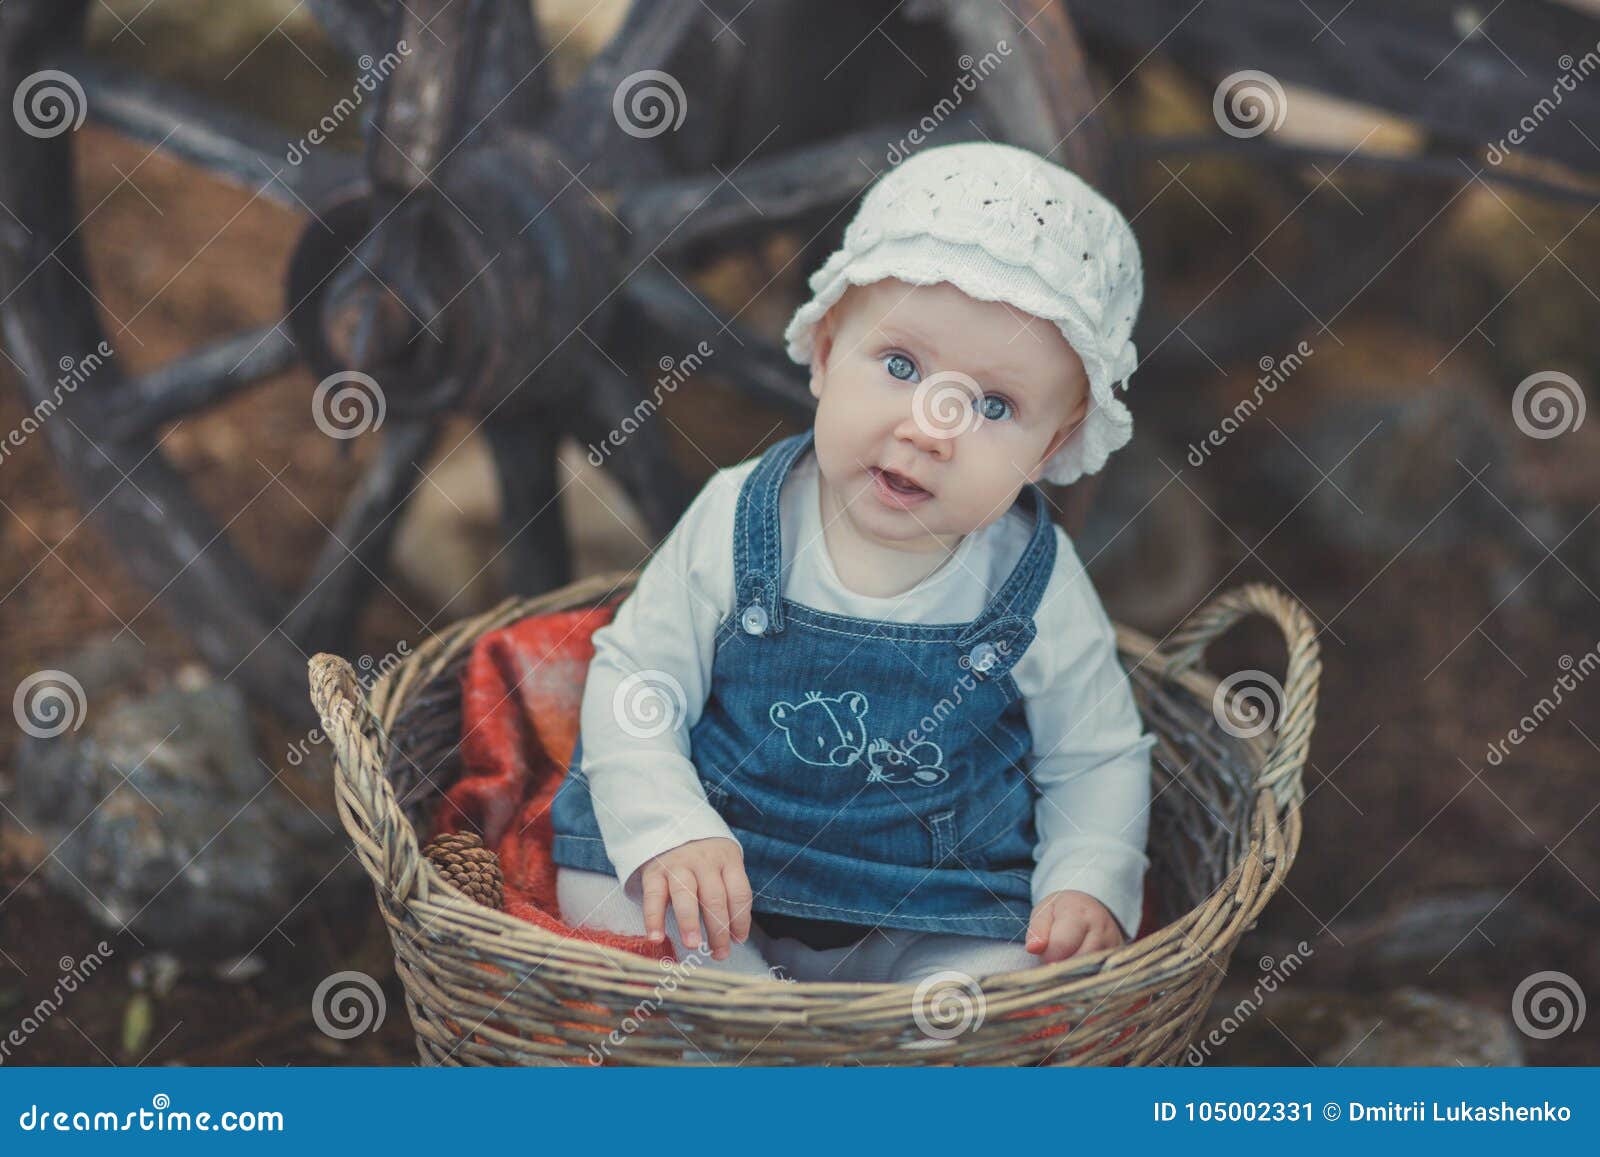 baby girl with ocean deep blue eyes and pinky cheek wearing white shirt and jeans dress and handmade craft tiny hat sitting in bas